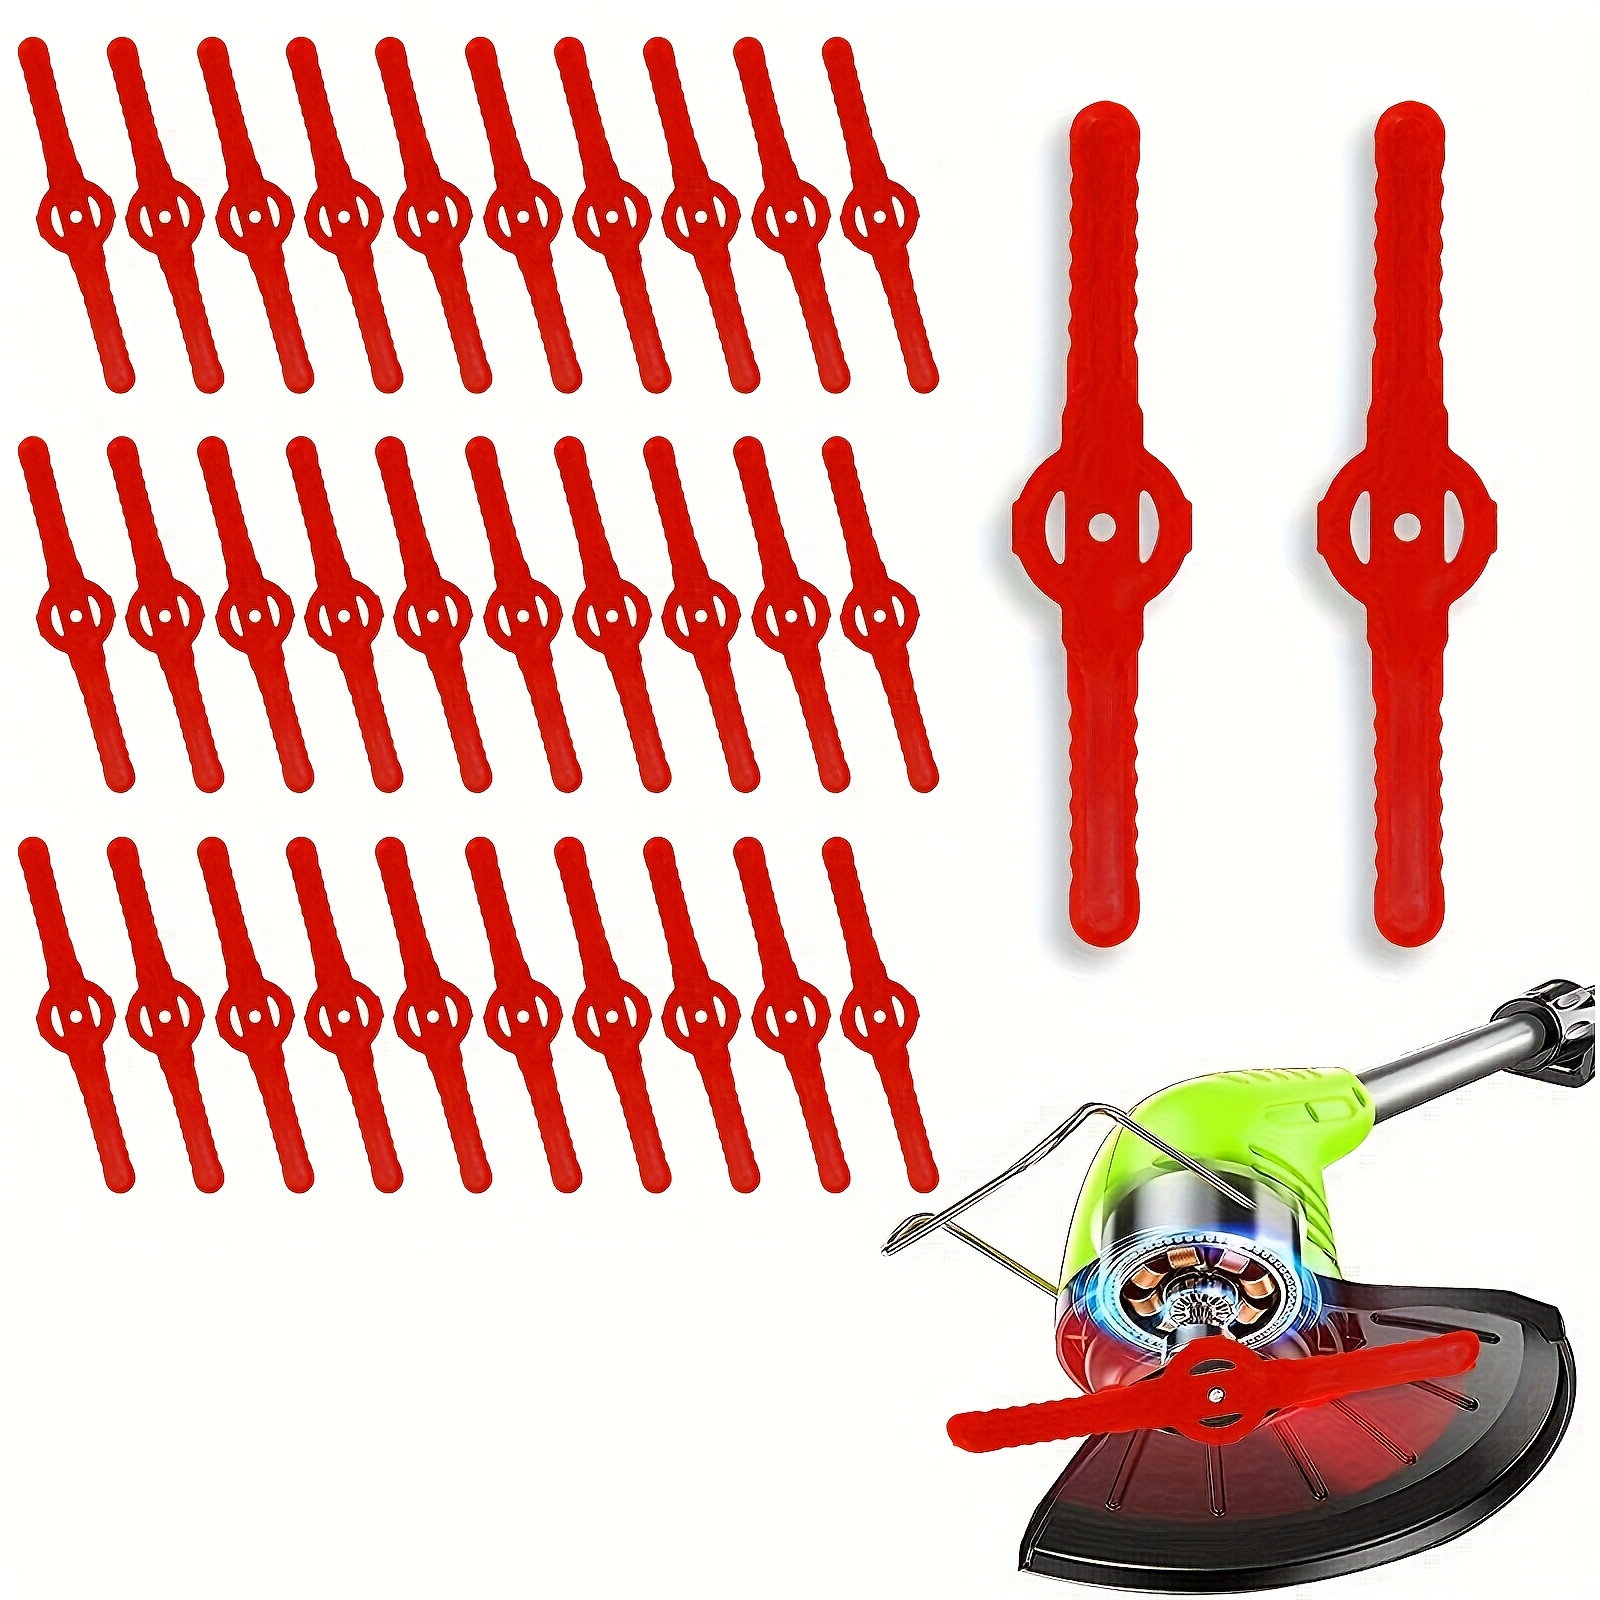 

30 Packs Red Weeder Plastic Blades, Replacement Flex Line Blades, Durable Weeder Blades, Lawn Mower Blades Replacement Mower Head Blades For Cordless Lawn Trimmers/edgers Red